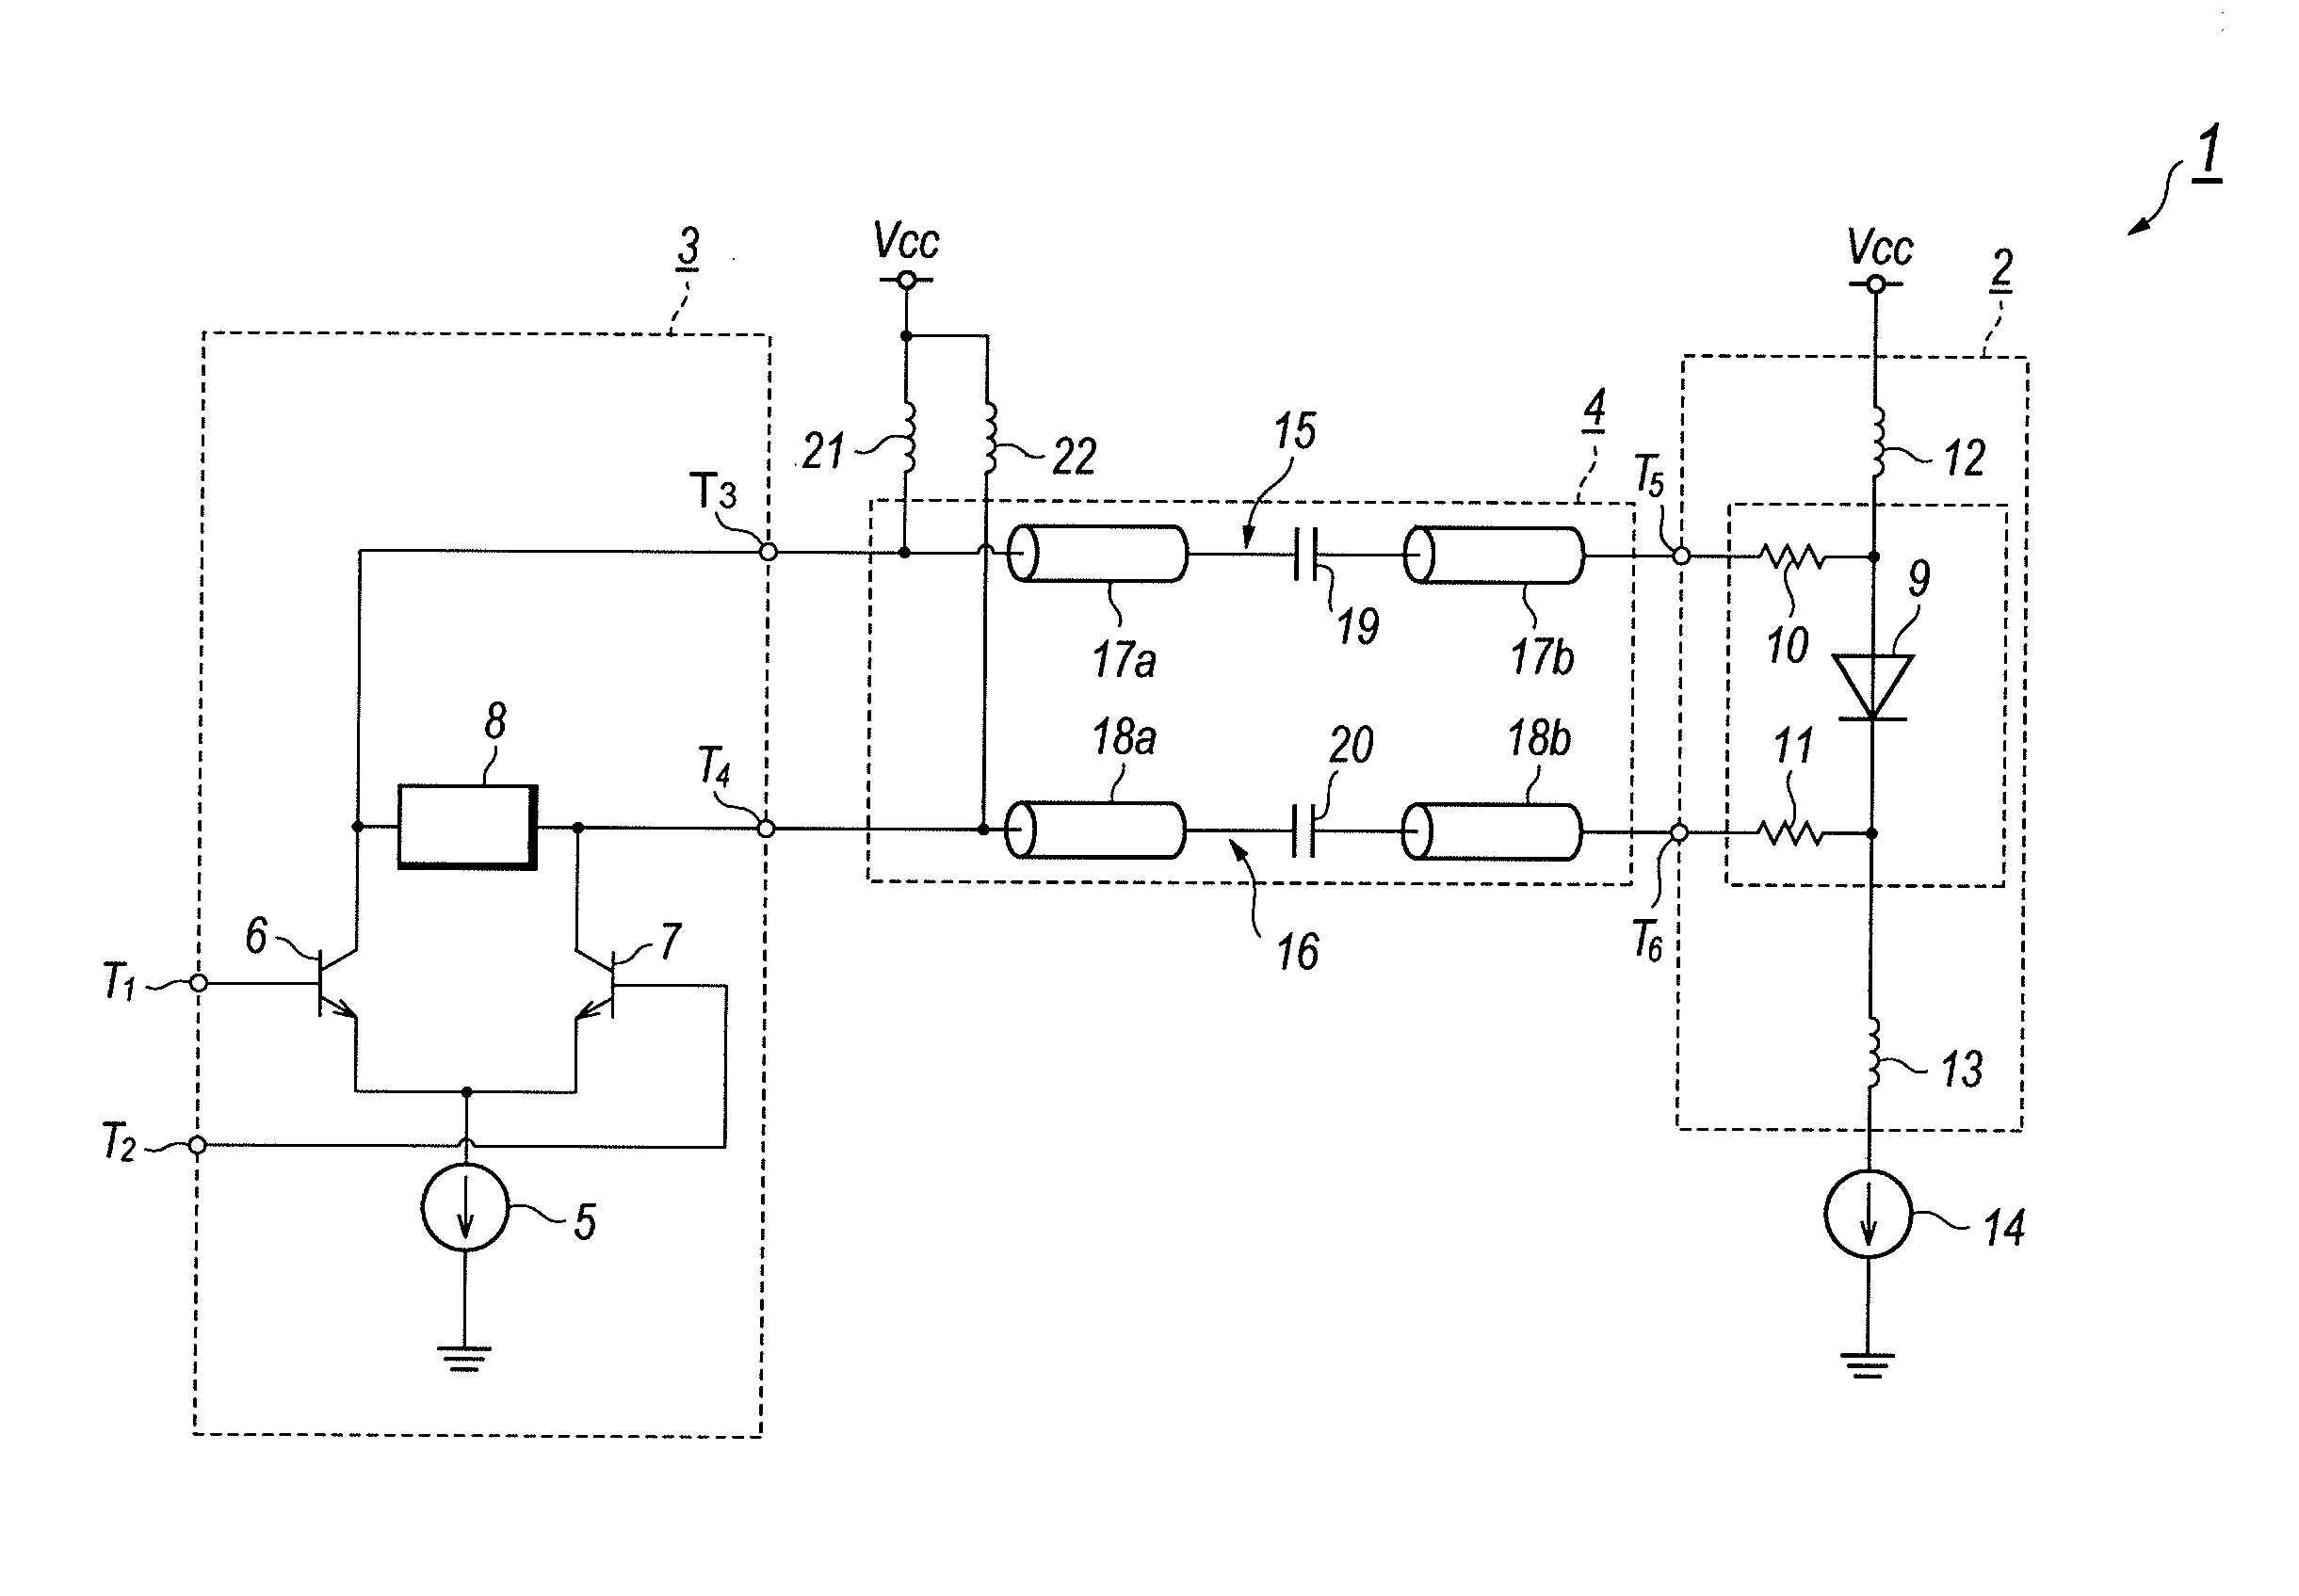 Laser diode driver with back terminator and optical transmitter providing the same